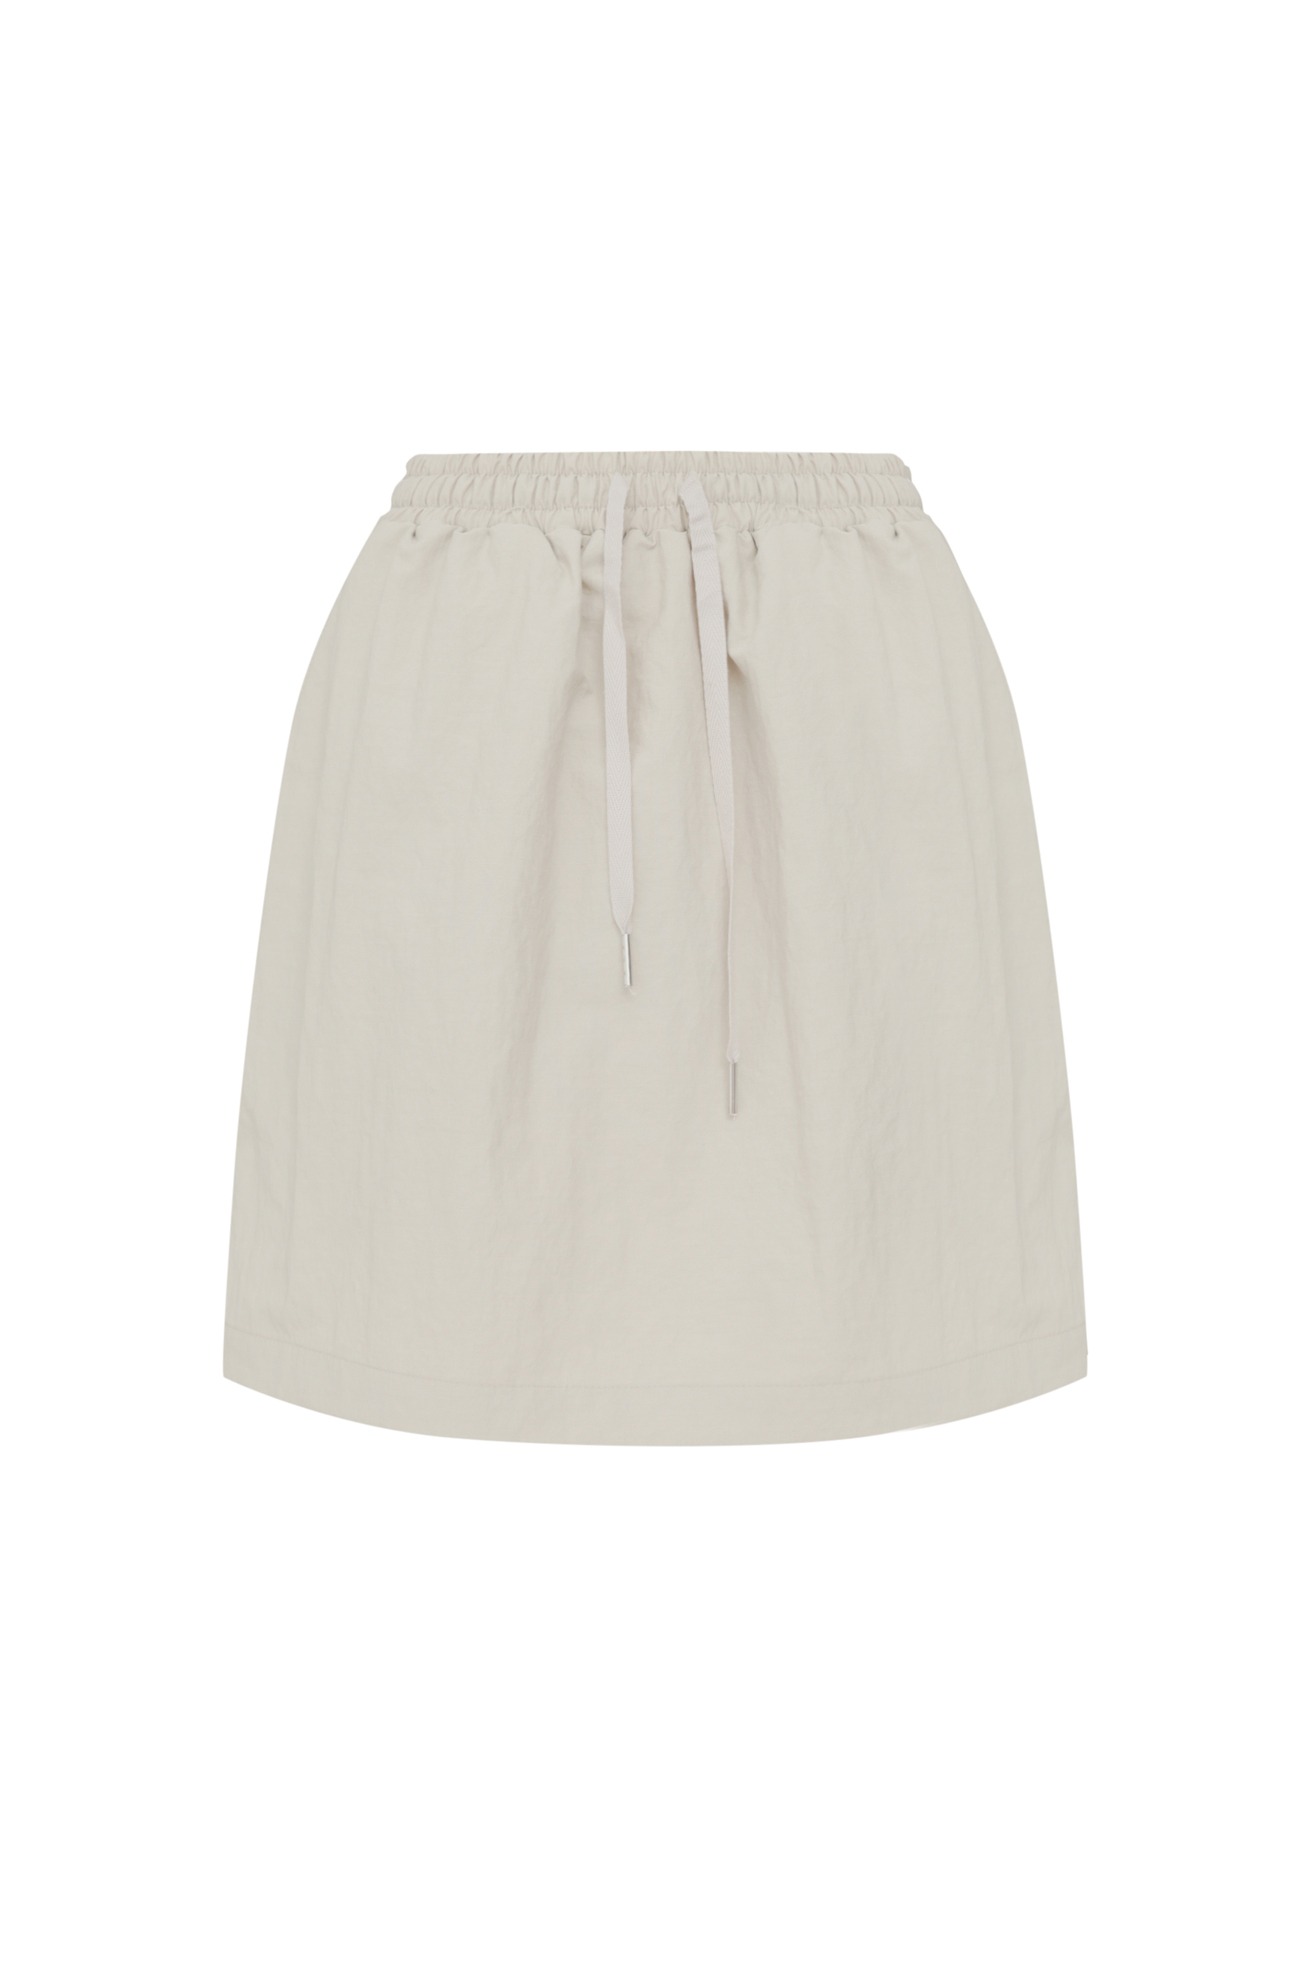 Banded Comfy Skirt  6/30 순차발송